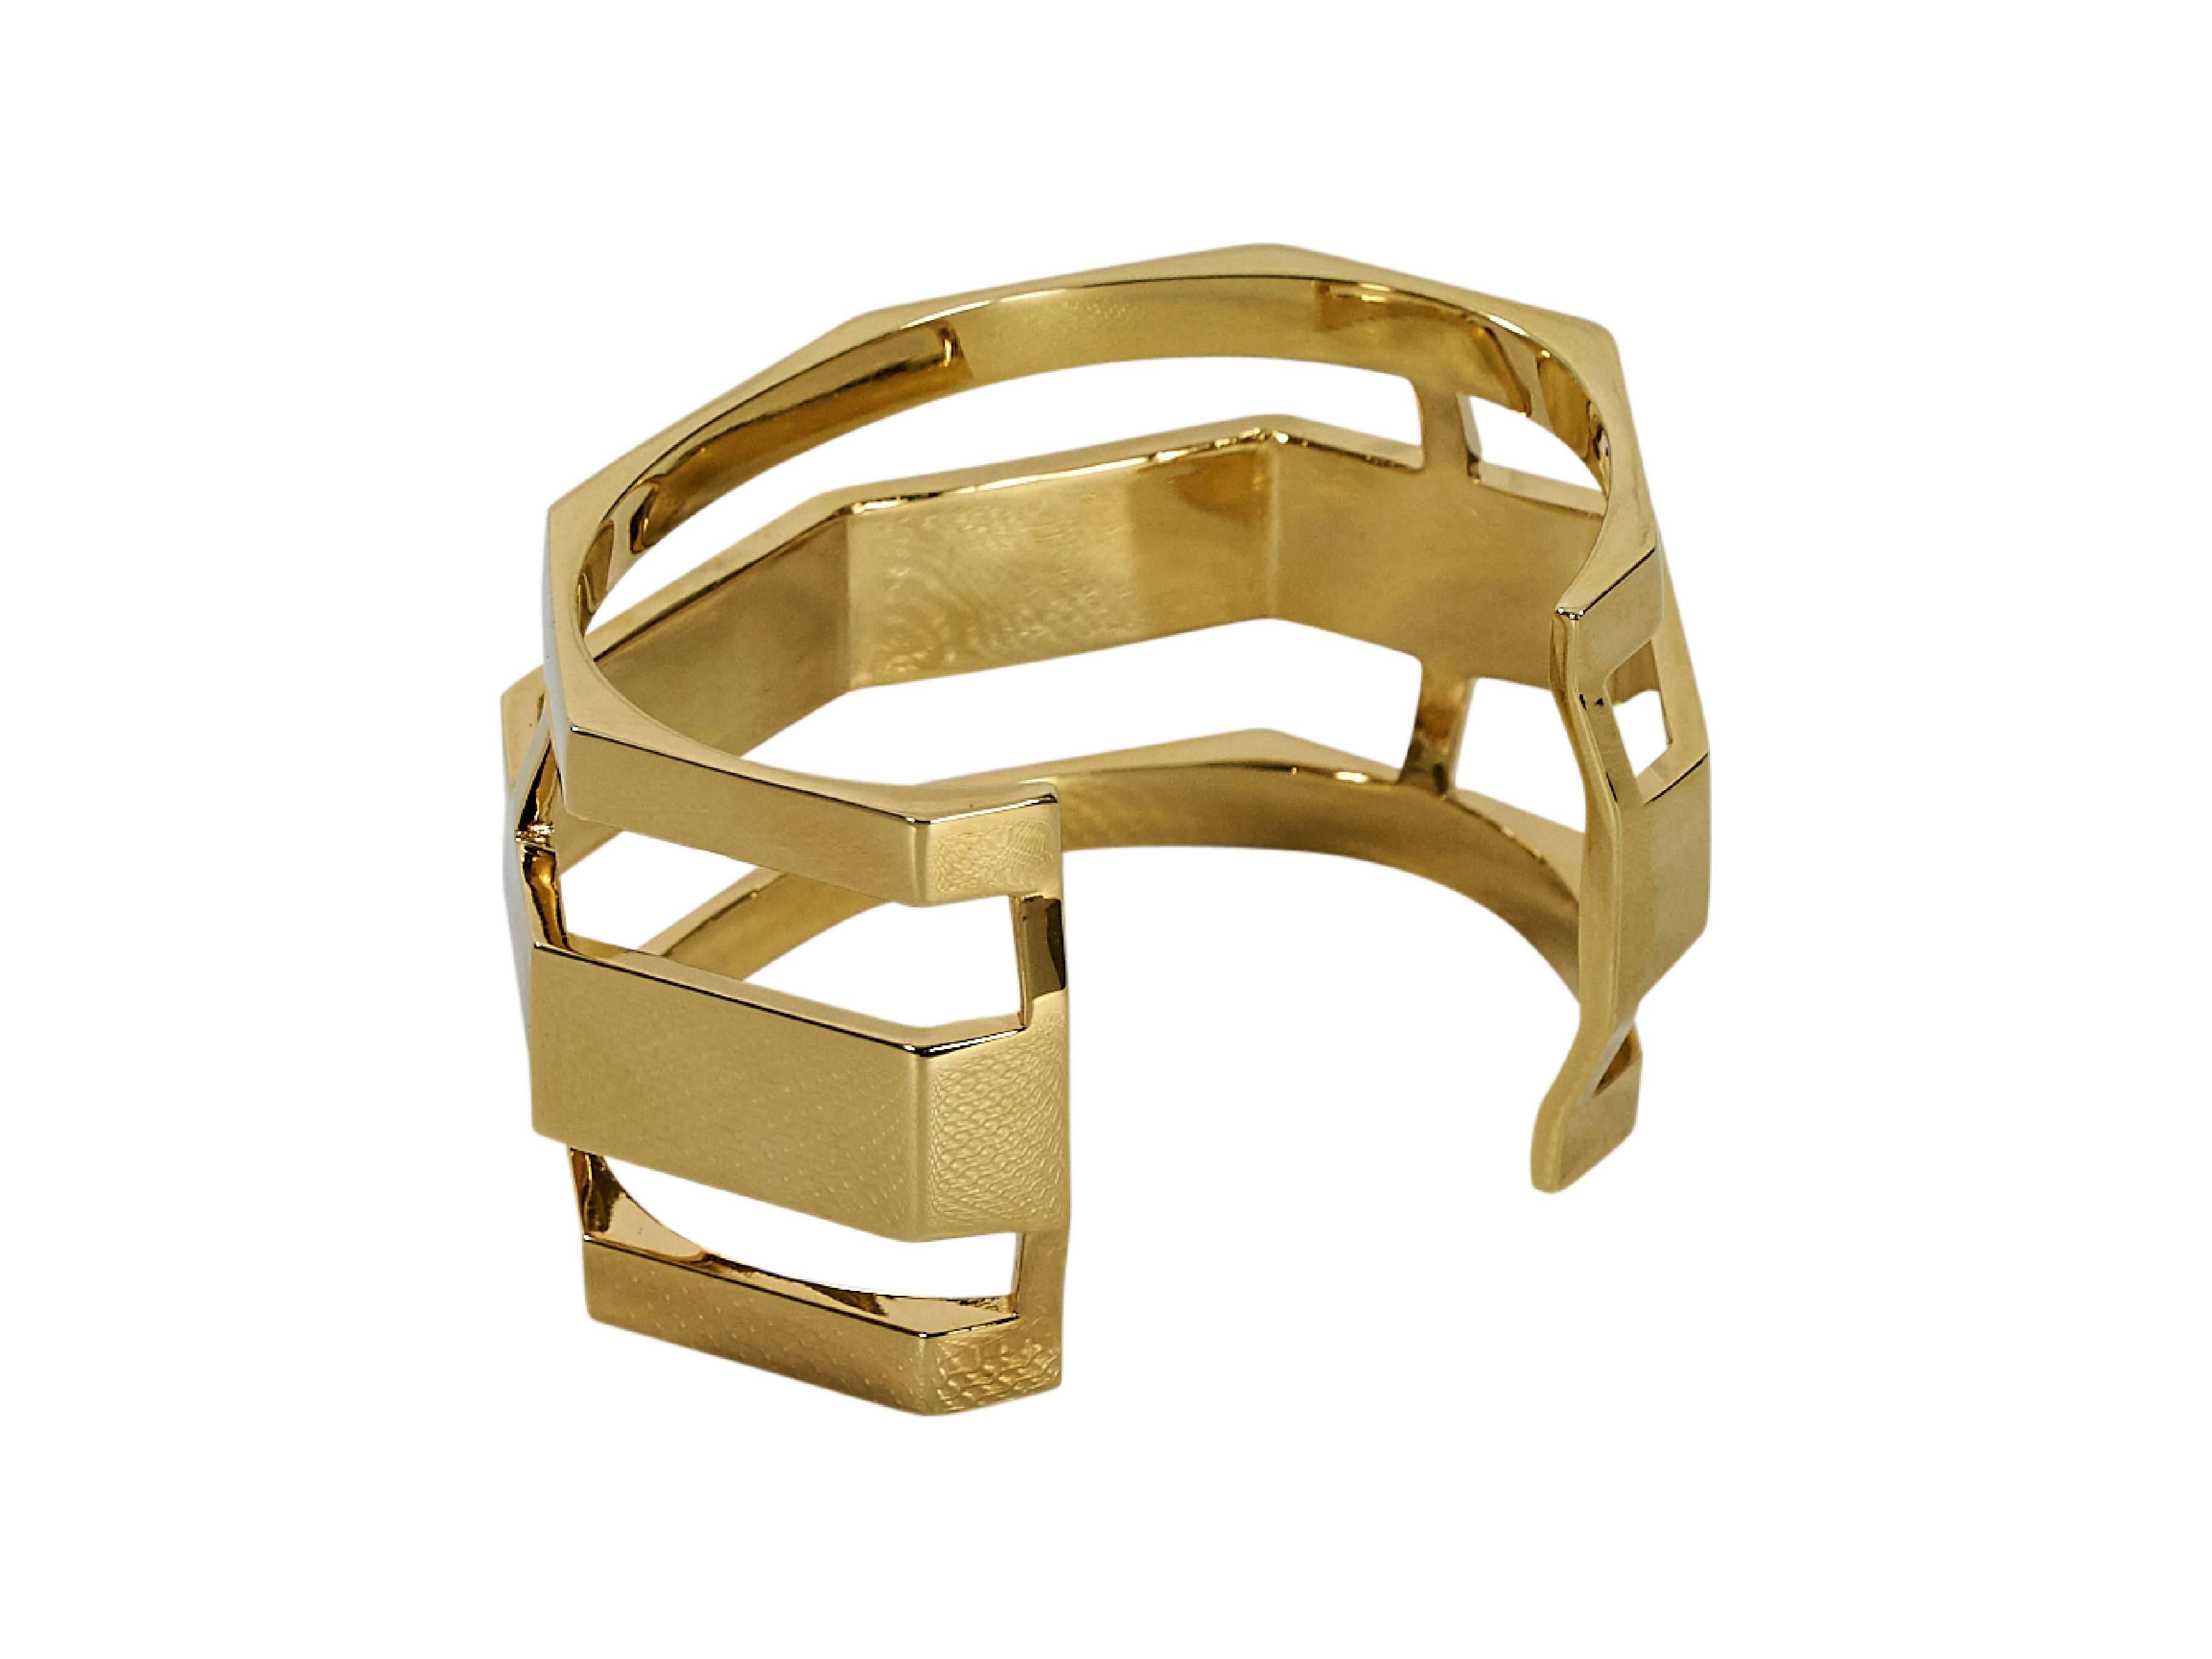 Product details:  Wide goldtone cuff by Via Saviene.  
Condition: Pre-owned. Very good.

Est. Retail $ 225.00